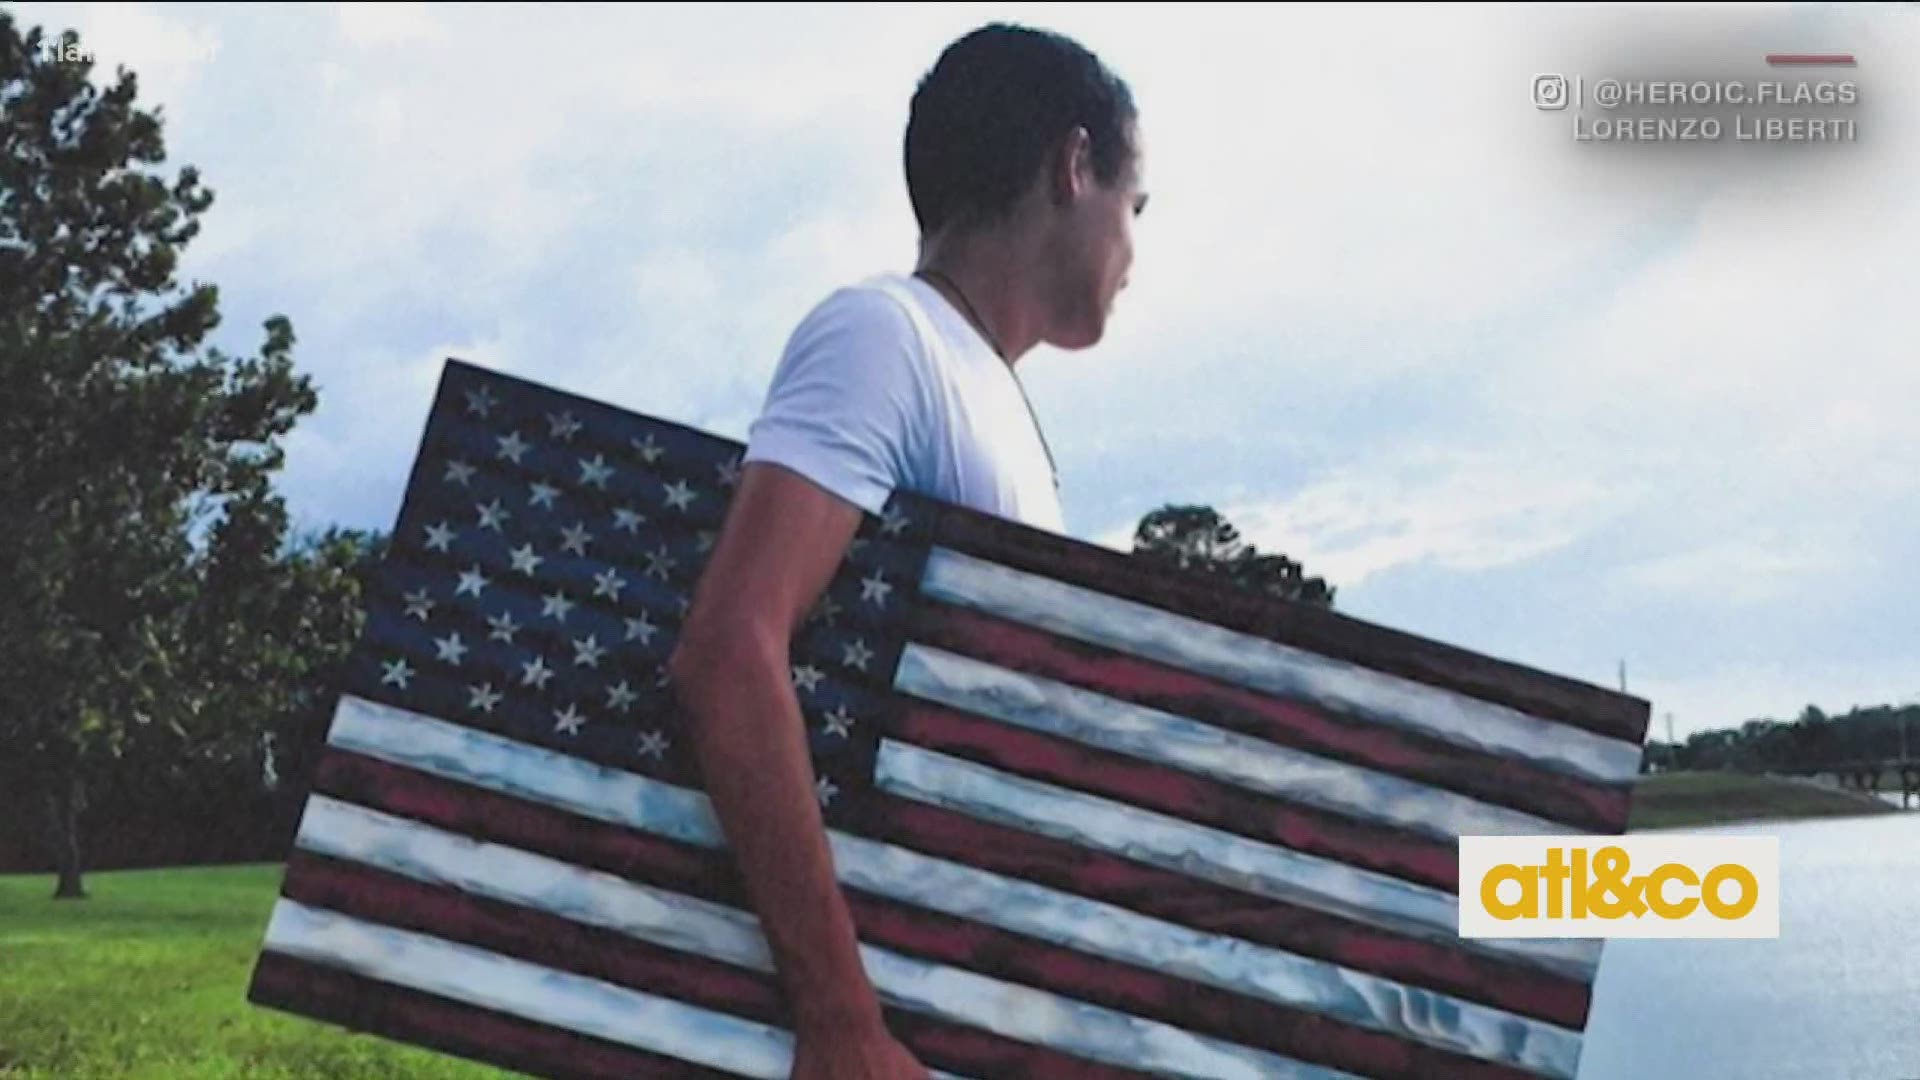 Heroic Flags! 15-year-old Lorenzo Liberti has raised over $13,000 for homeless veterans, special needs kids, and first responders by selling handcarved flags.